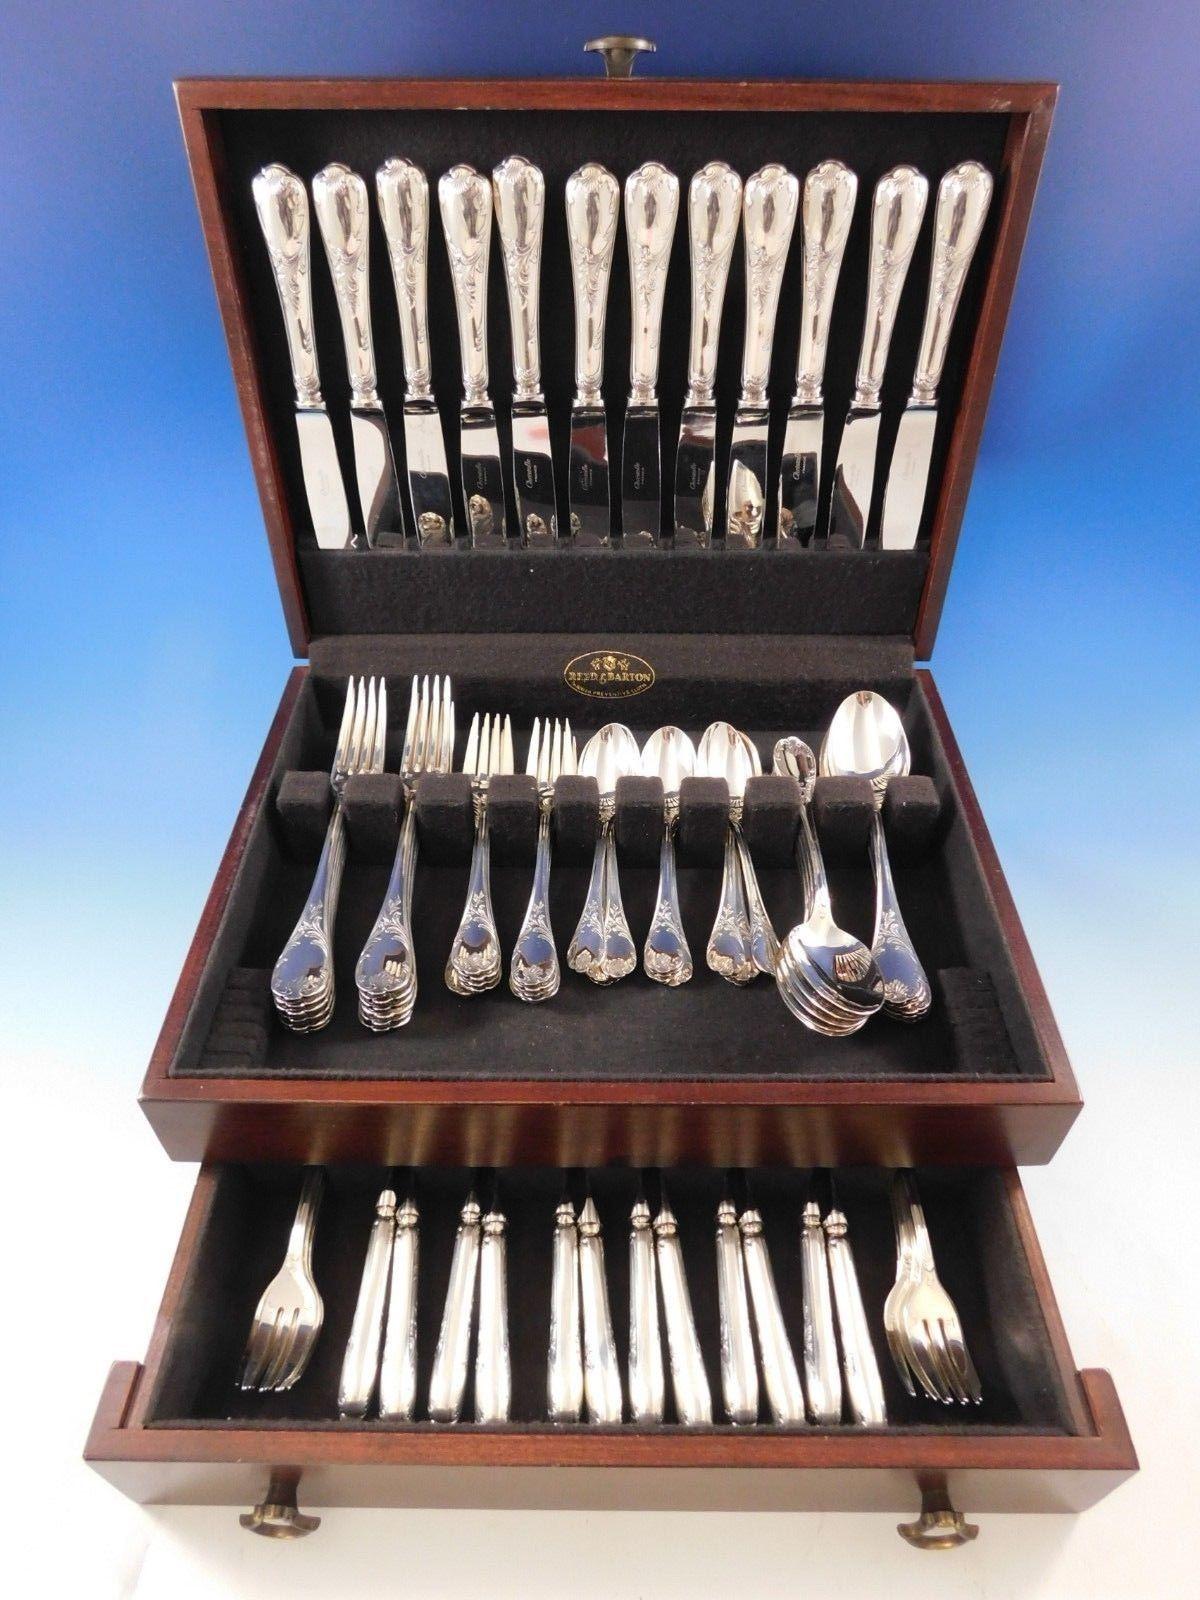 Beautiful dinner size Marly by Christofle silver plate flatware set of 84 pieces. This set includes:

12 dinner knives, 10